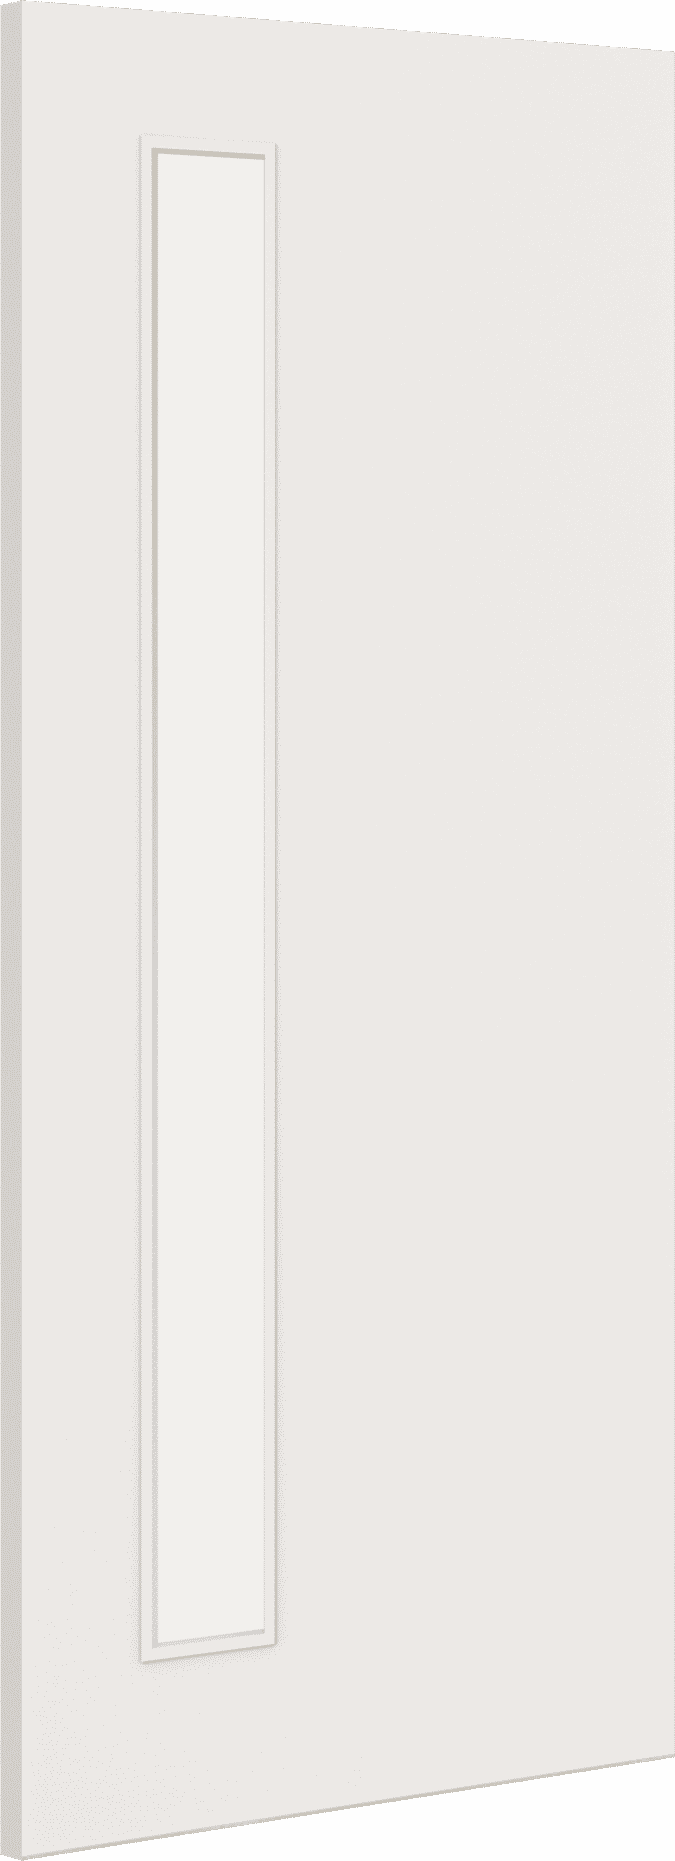 1981mm x 610mm x 44mm (24") Architectural Paint Grade White 06 Clear Glazed Fire Door Blank